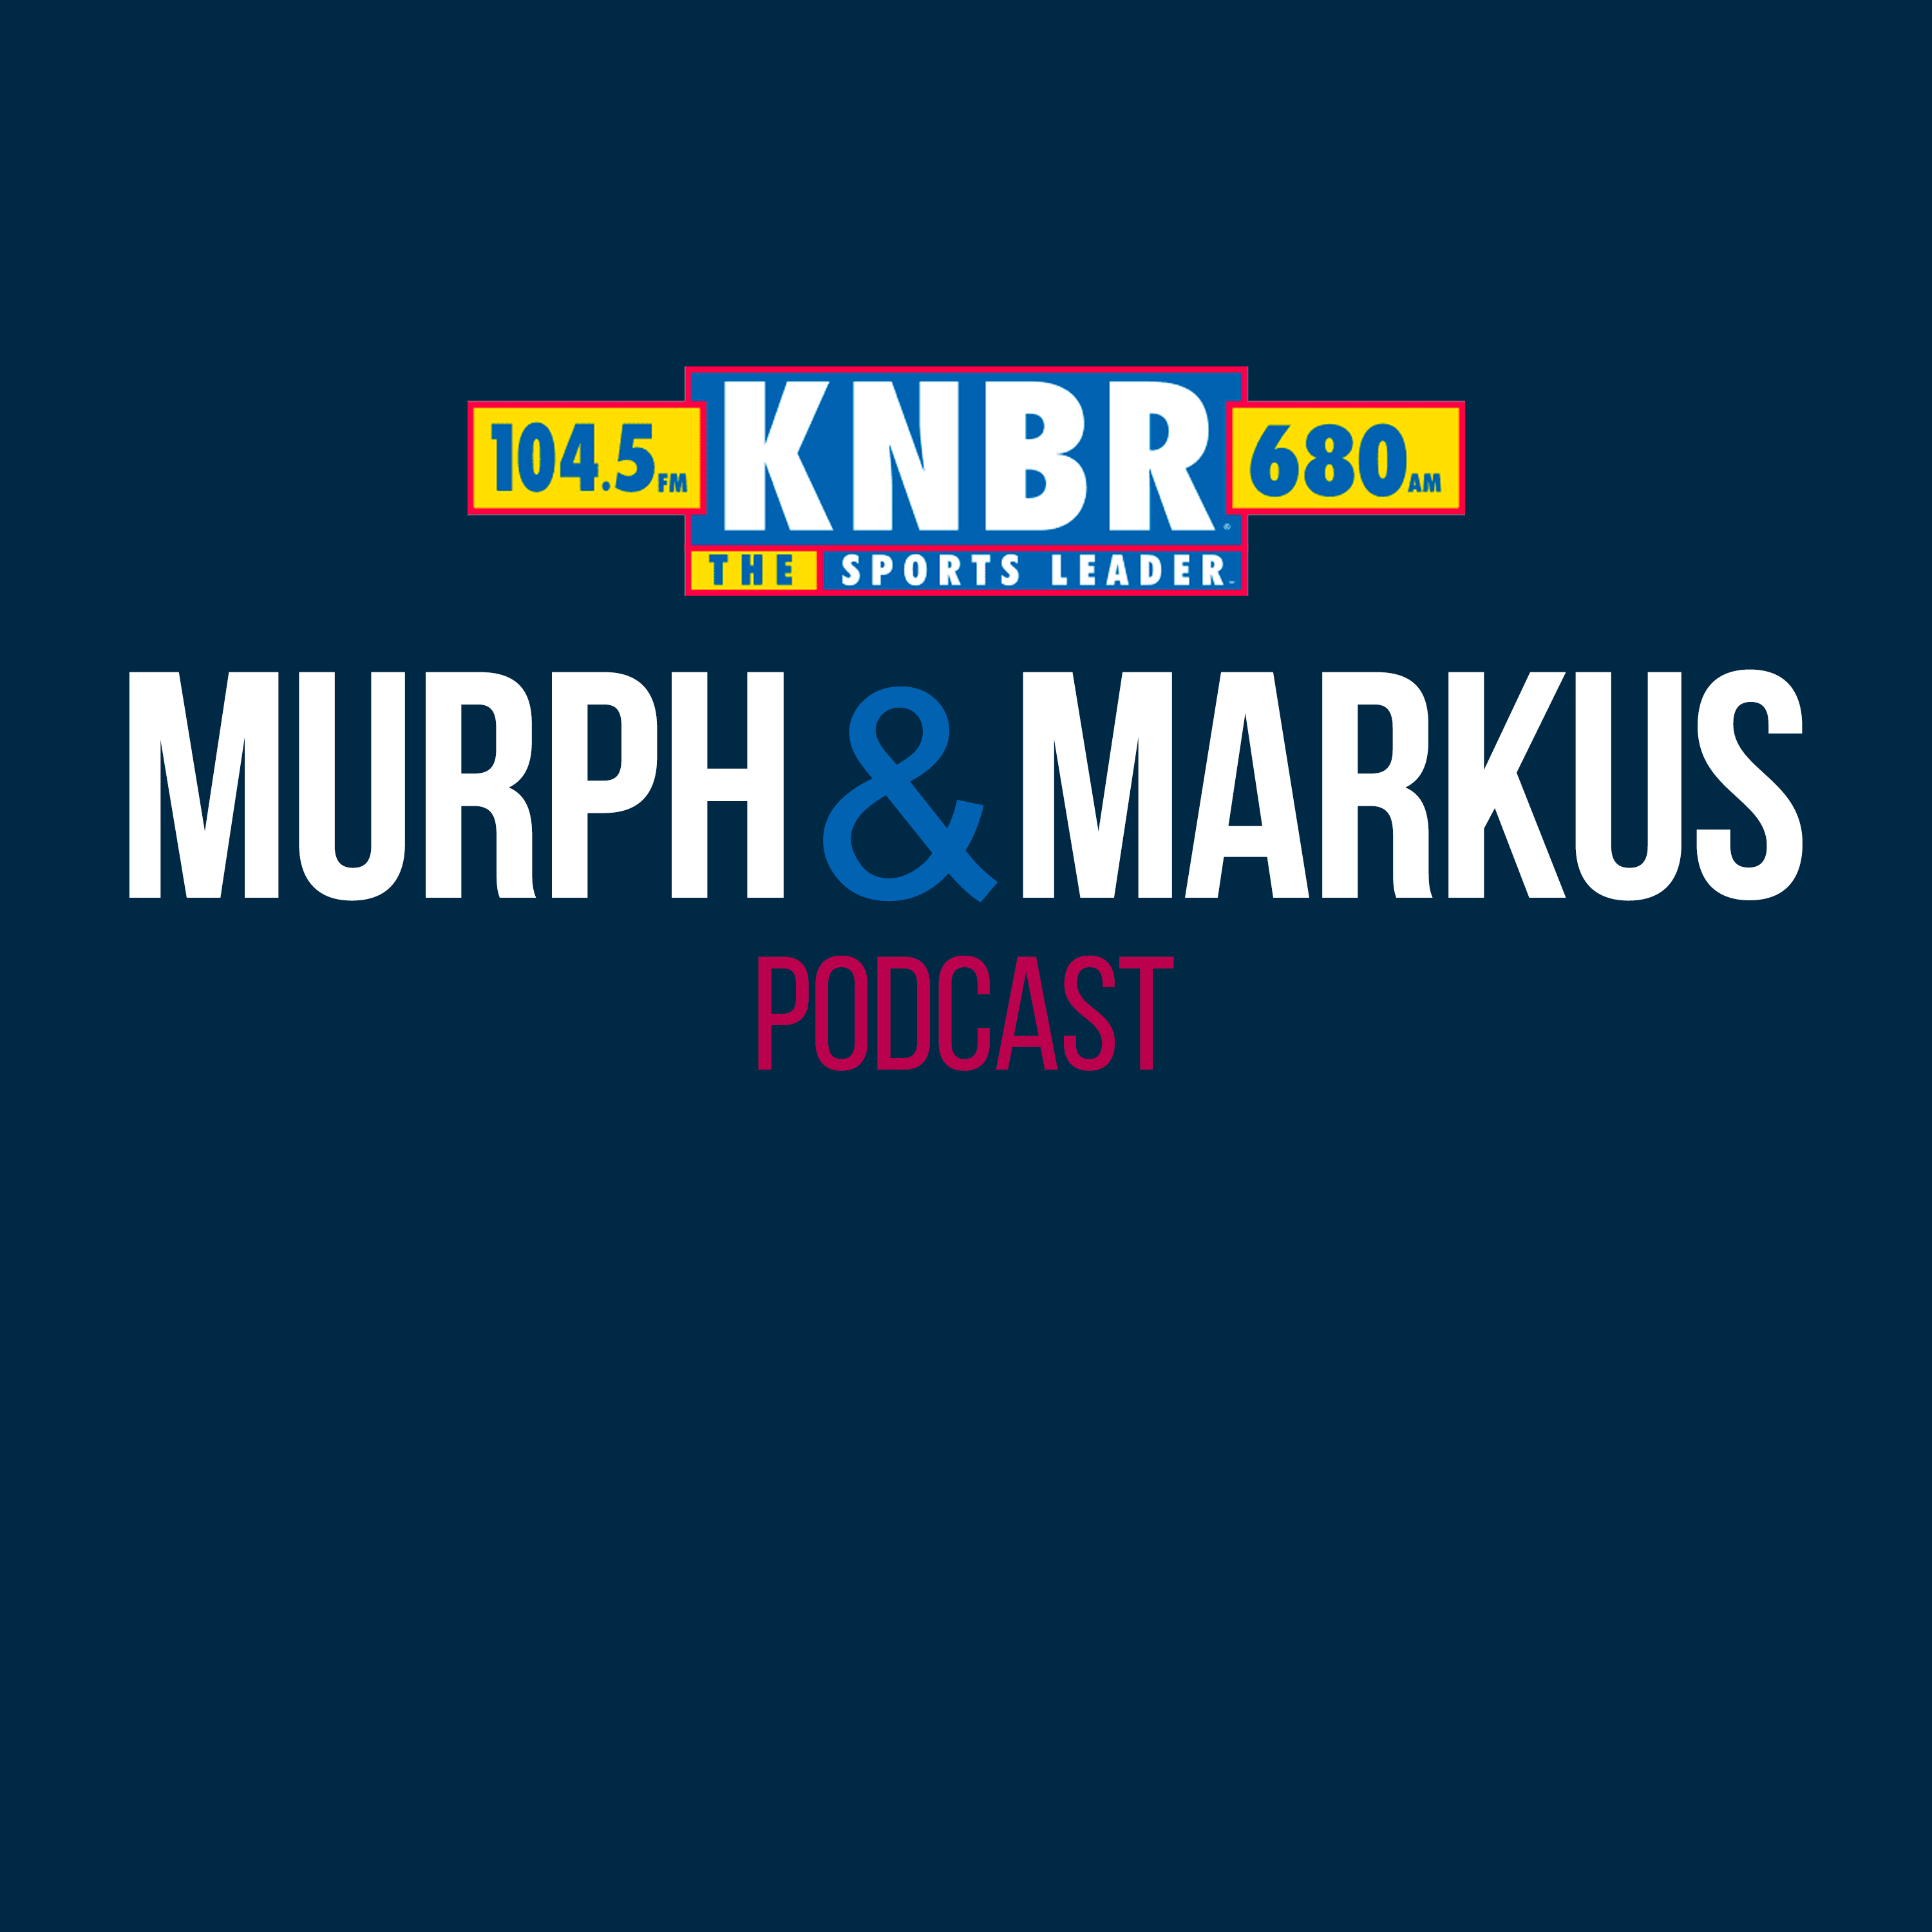 5-3 Hour 3: Murph & Markus dive into the Cooler of Content, react to Mad Dog Russo's comments from yesterday, and hear from fans on the state of the Giants